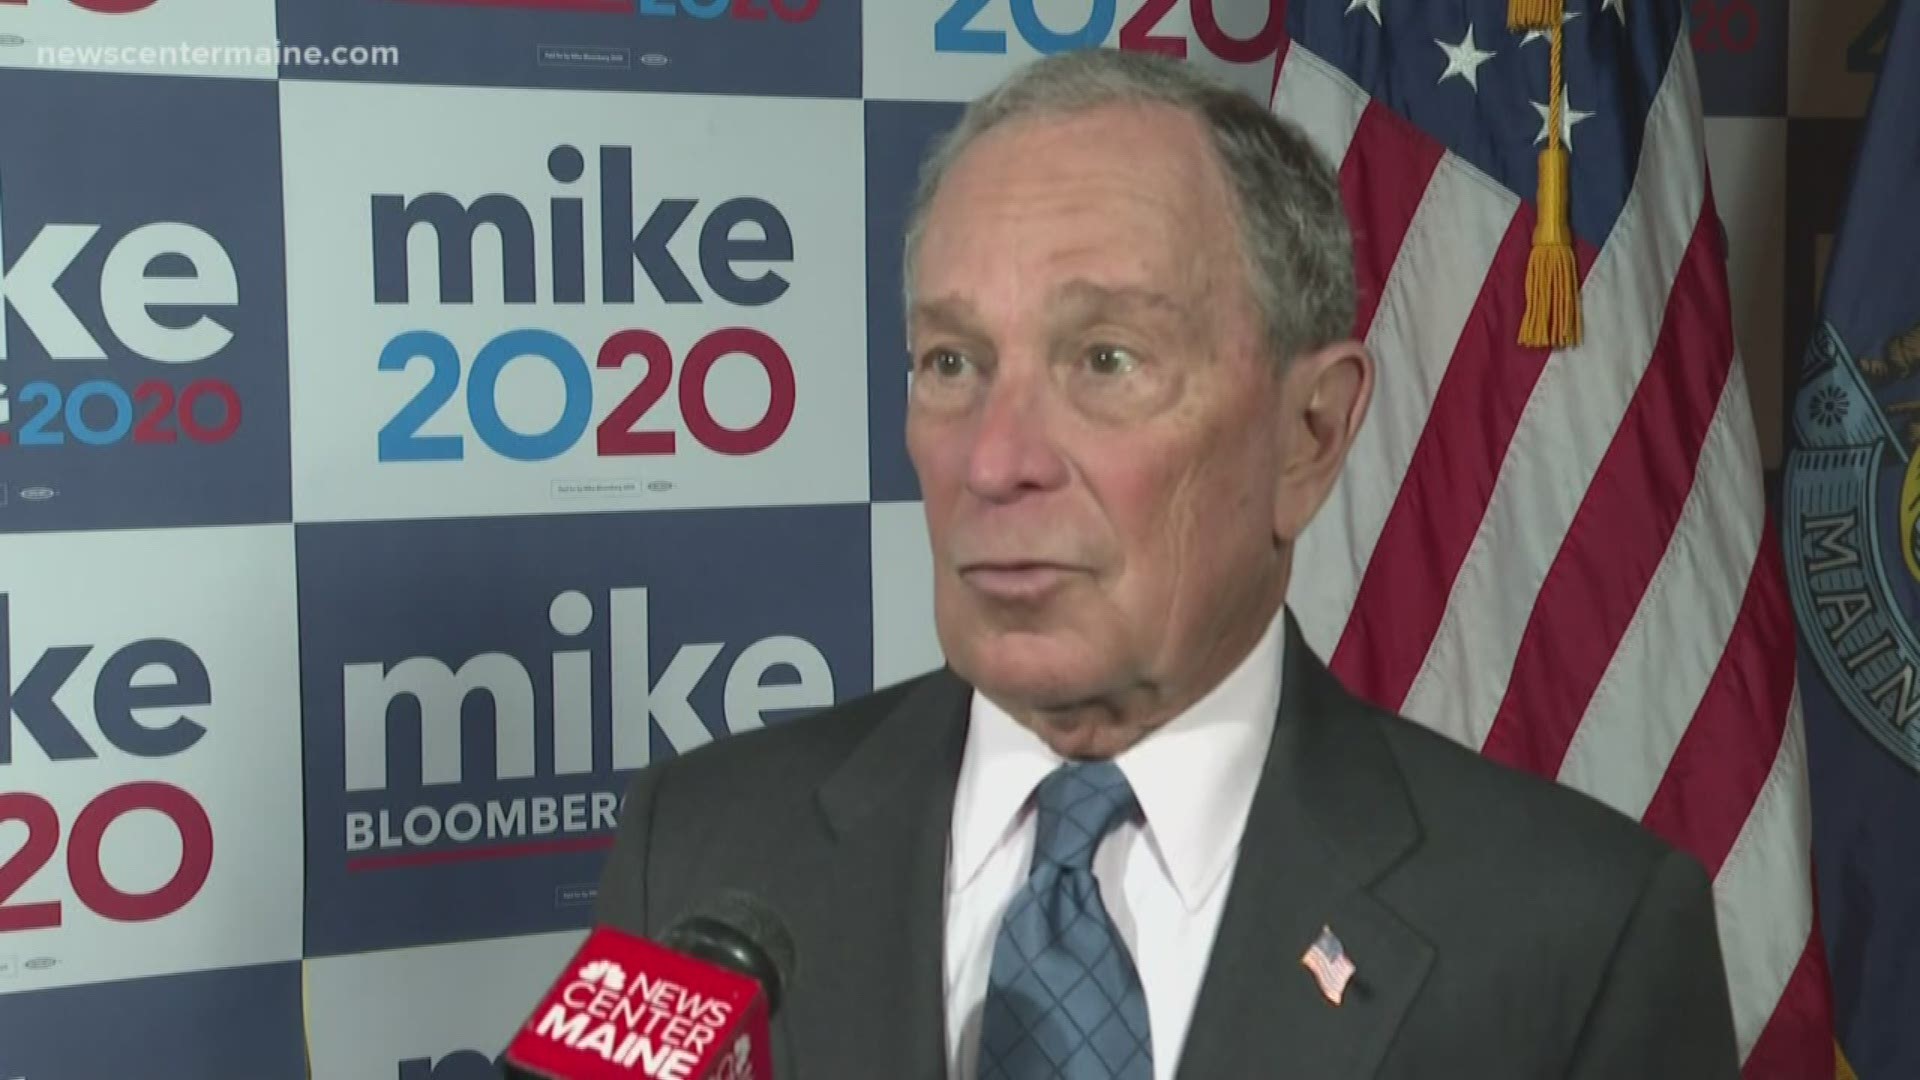 Presidential candidate Bloomberg in Maine